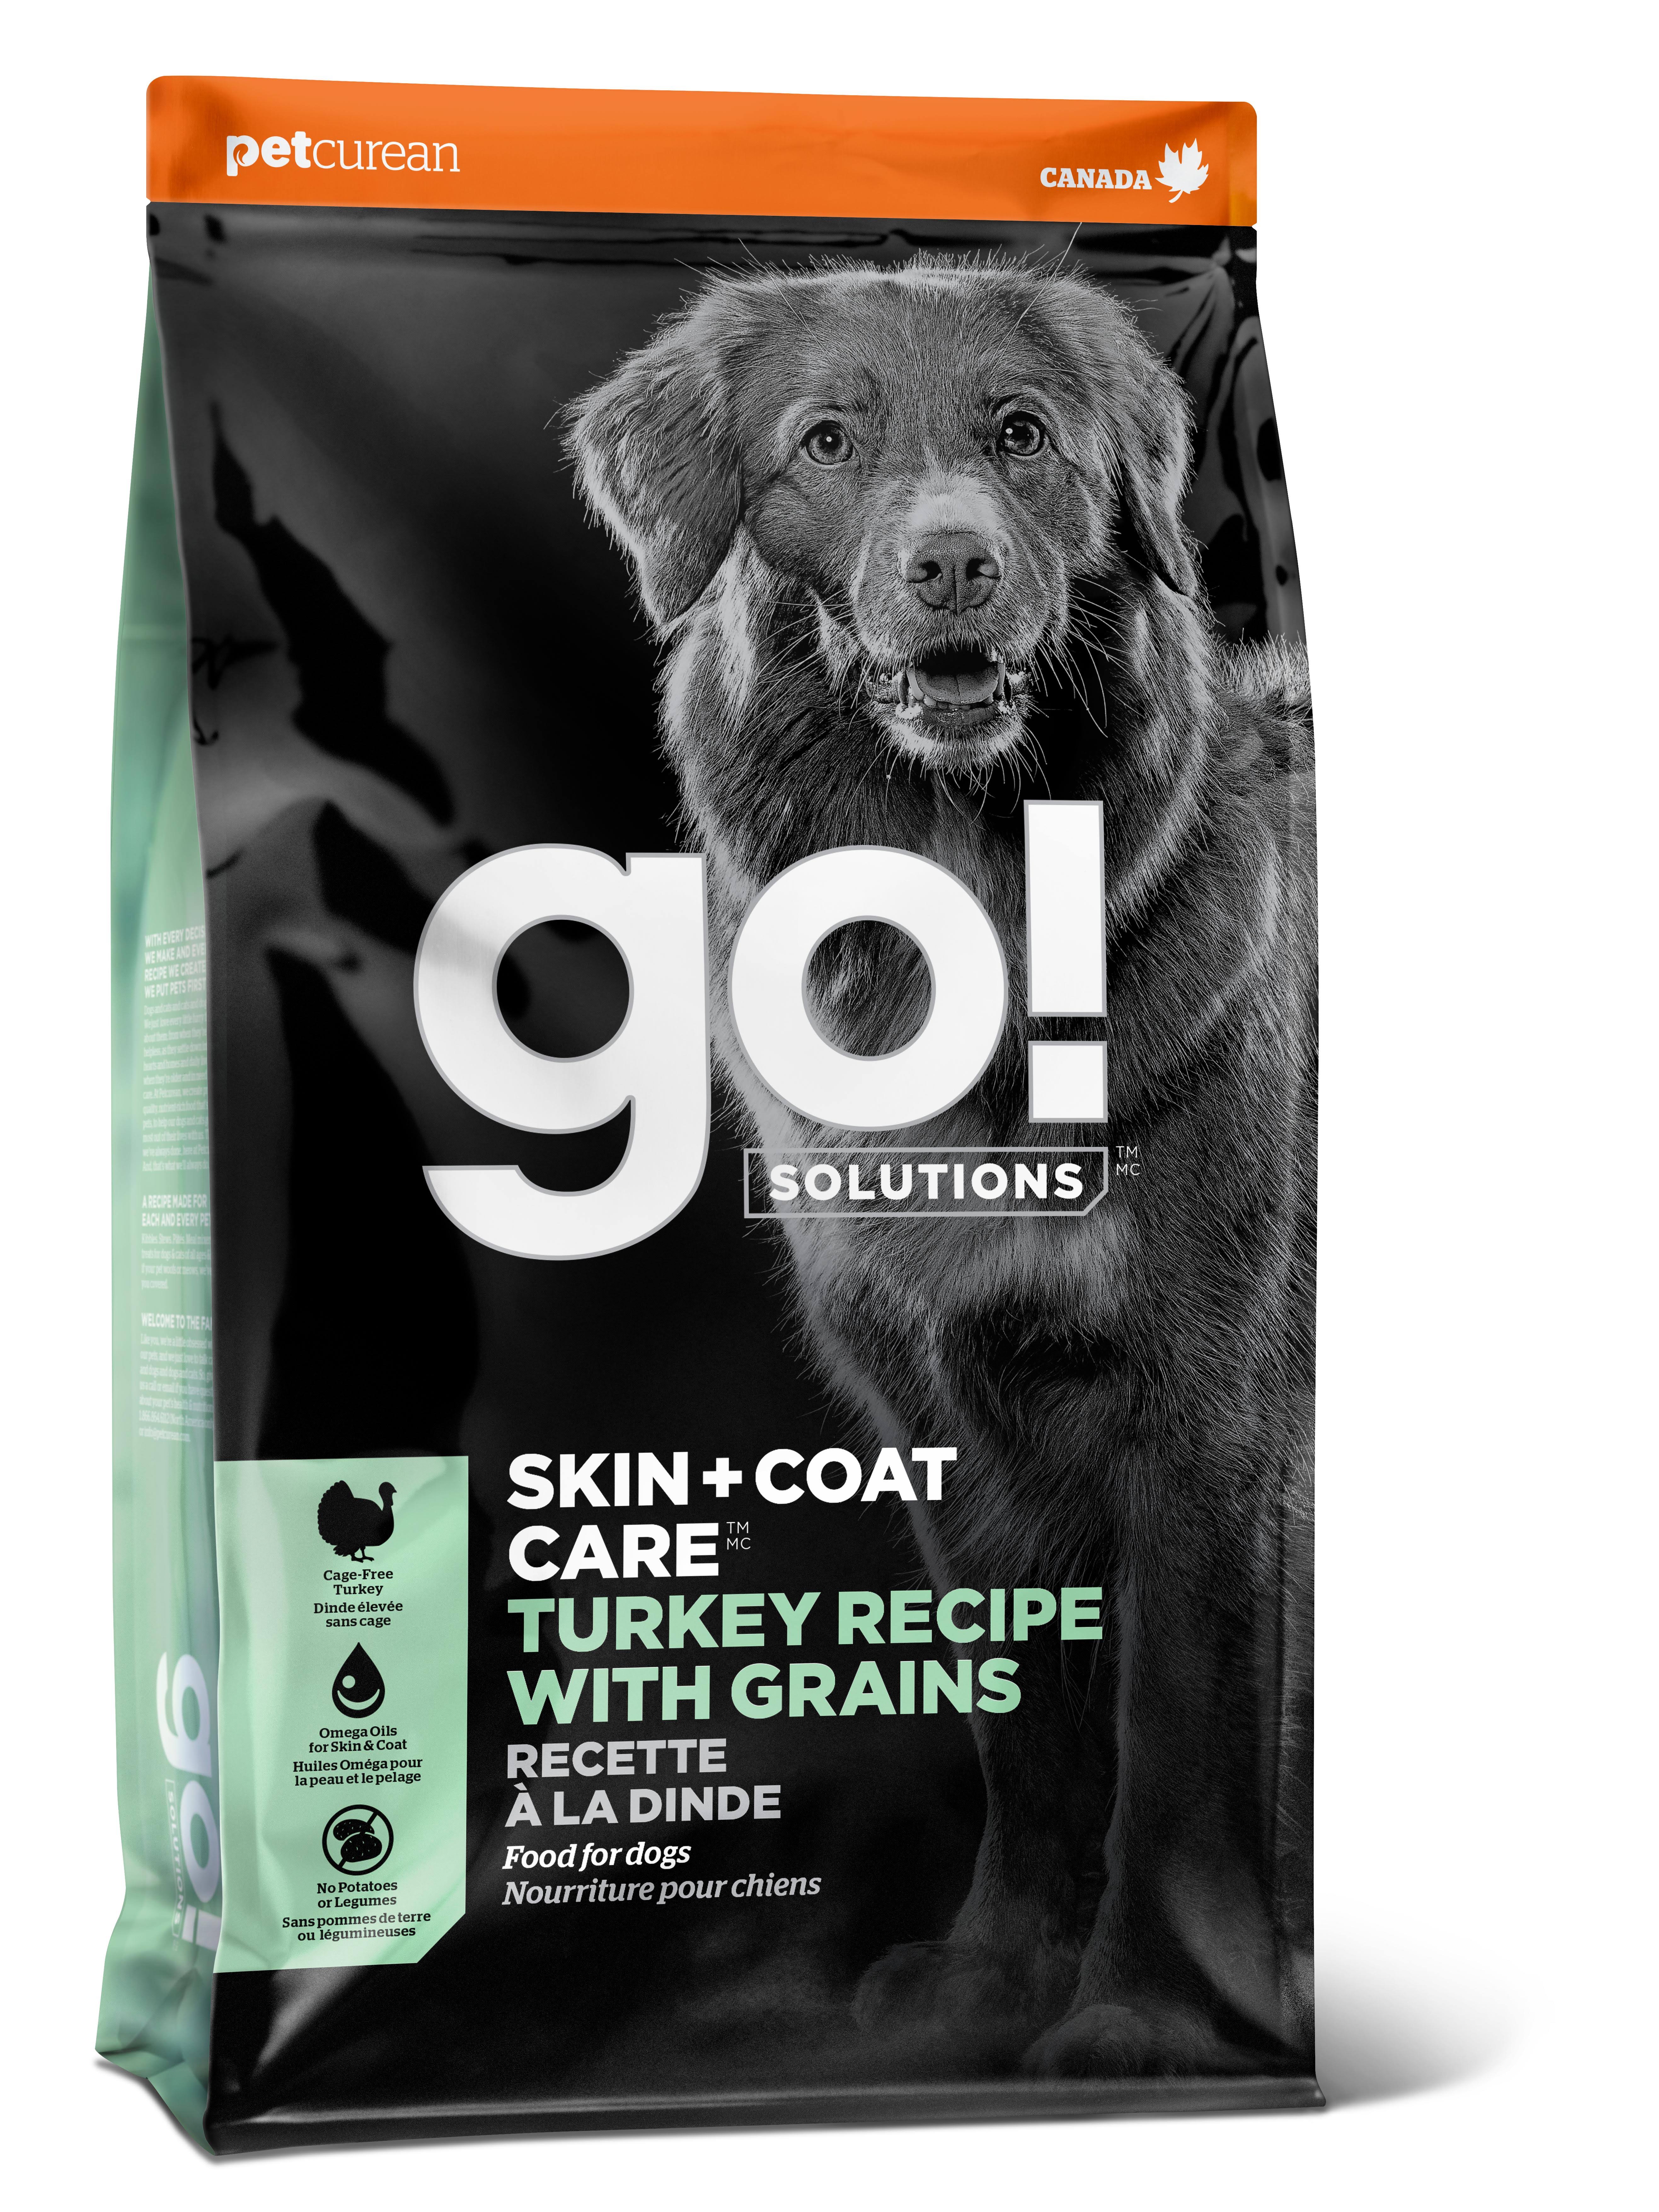 Go! Solutions Skin + Coat Care Turkey with Grains Dry Dog Food, 3.5-lb